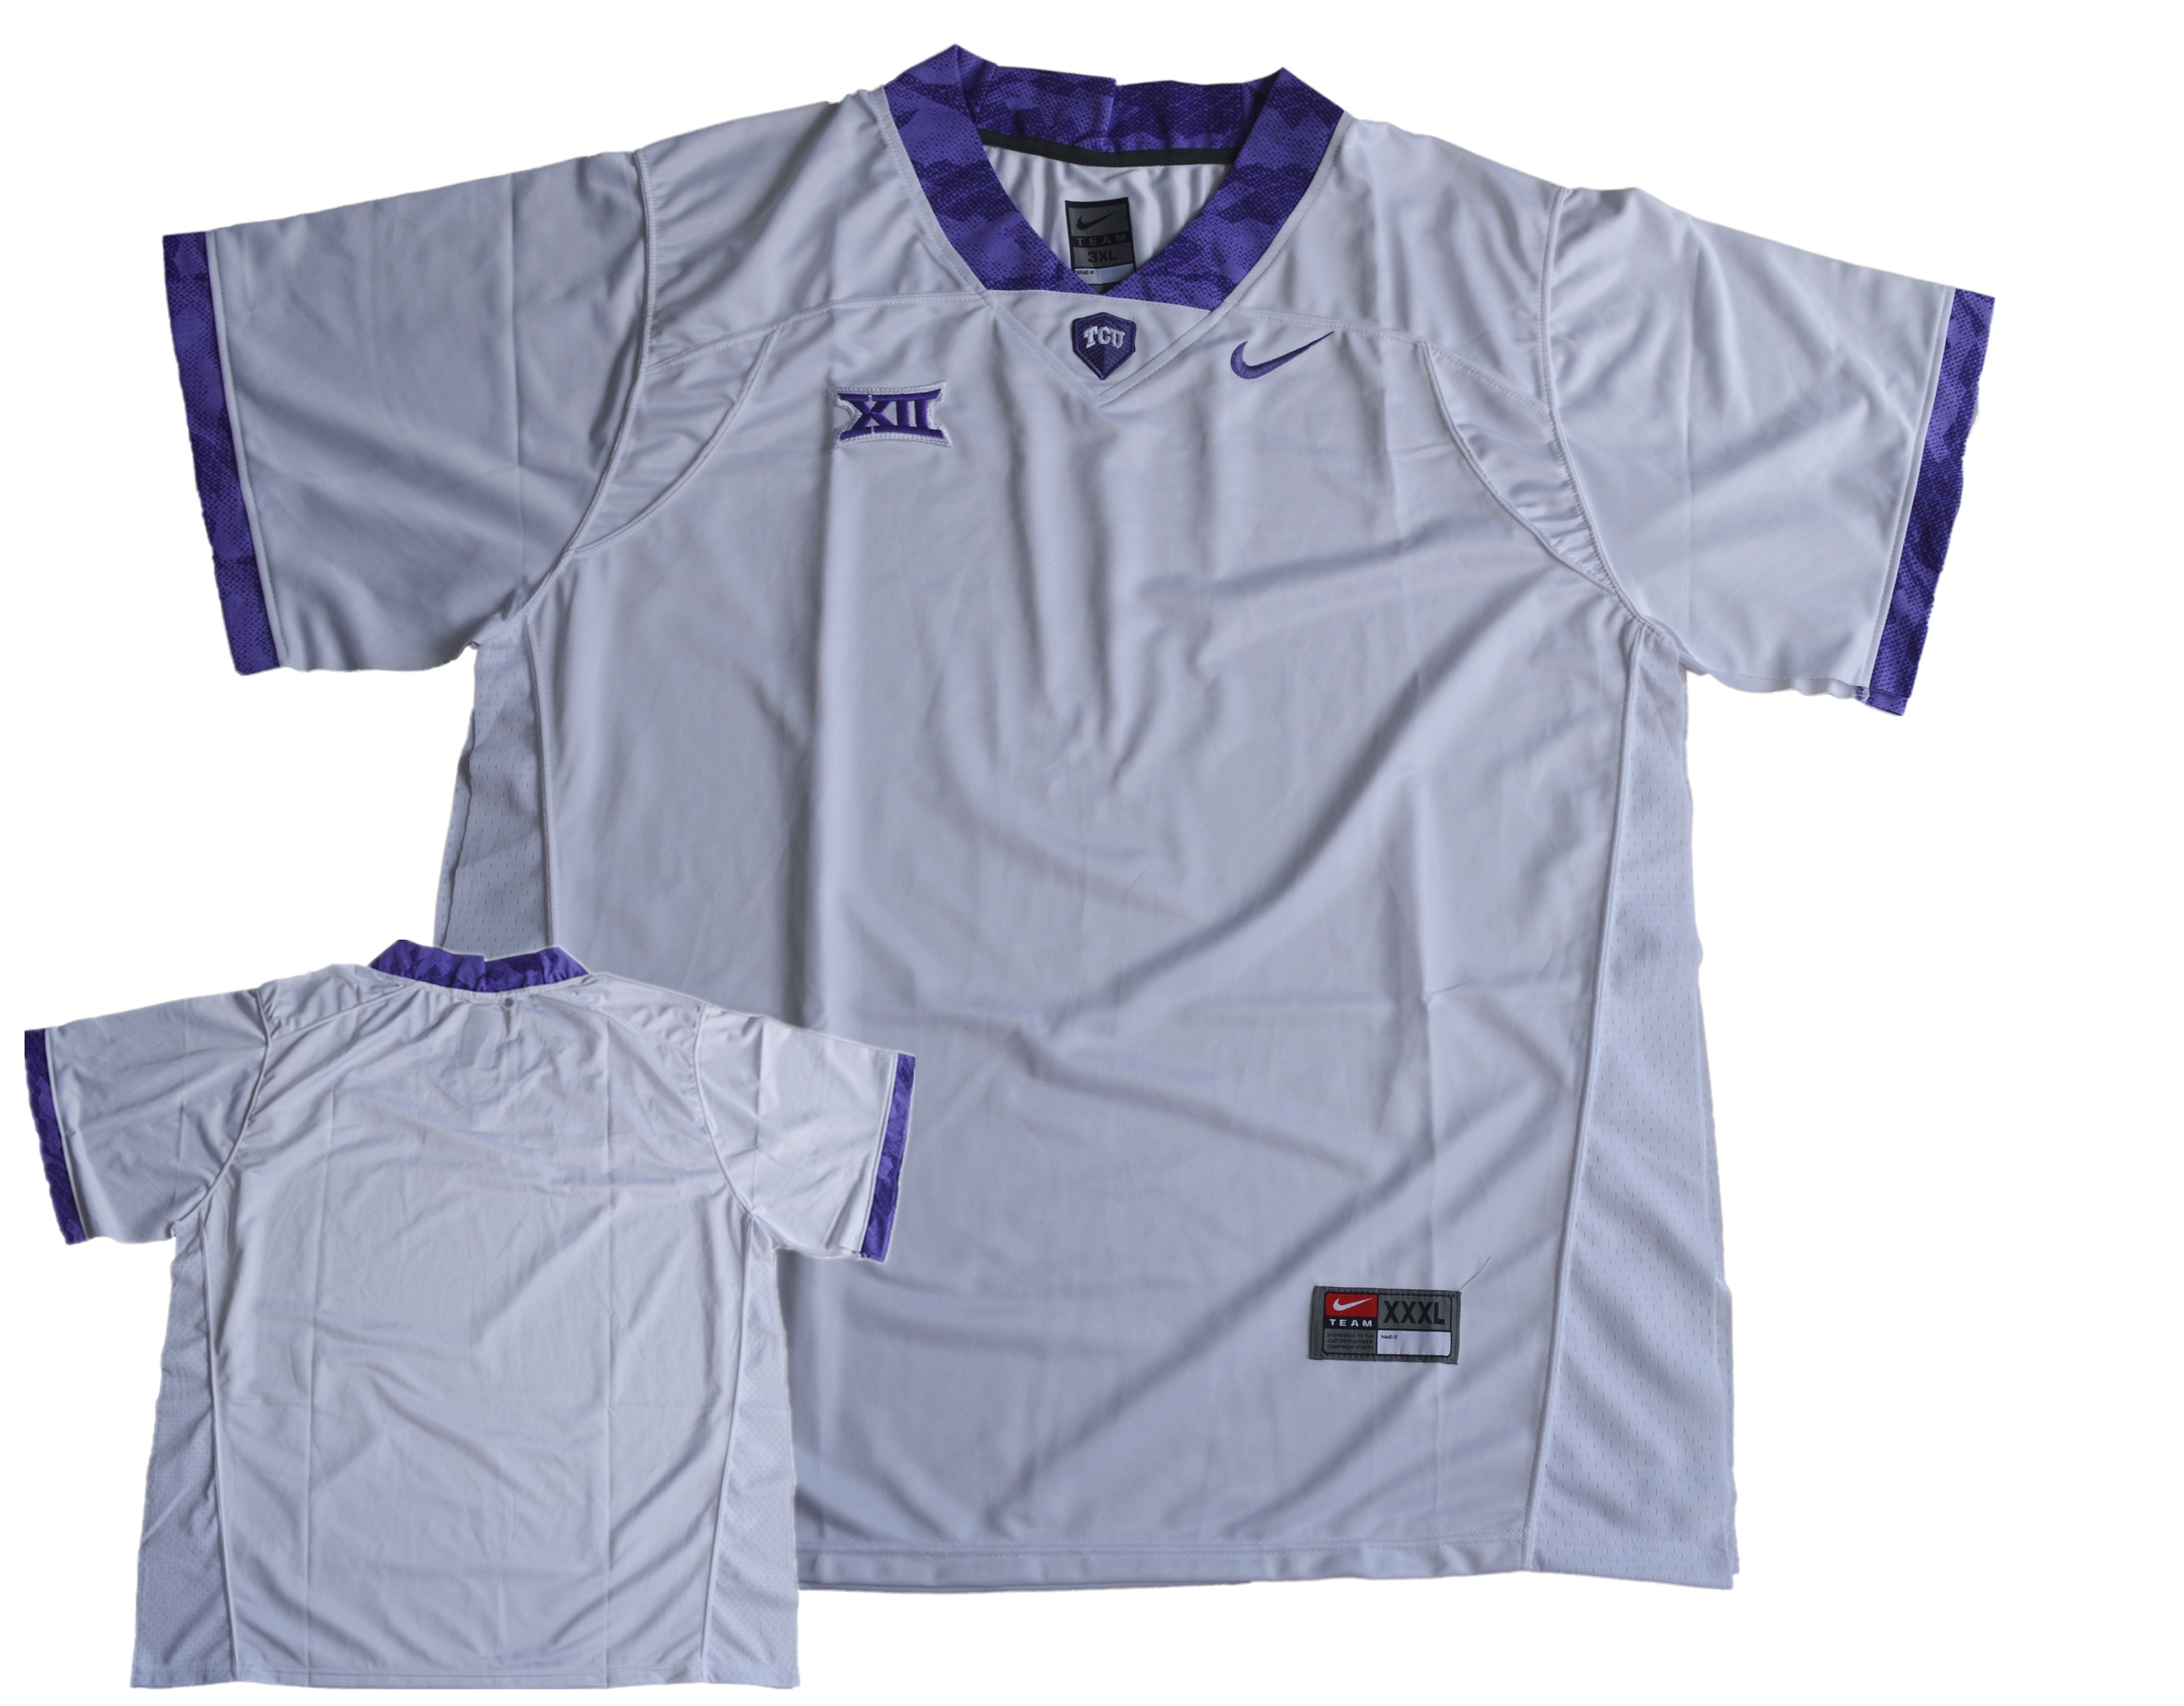 TCU Horned Frogs Blank White College Football Jersey